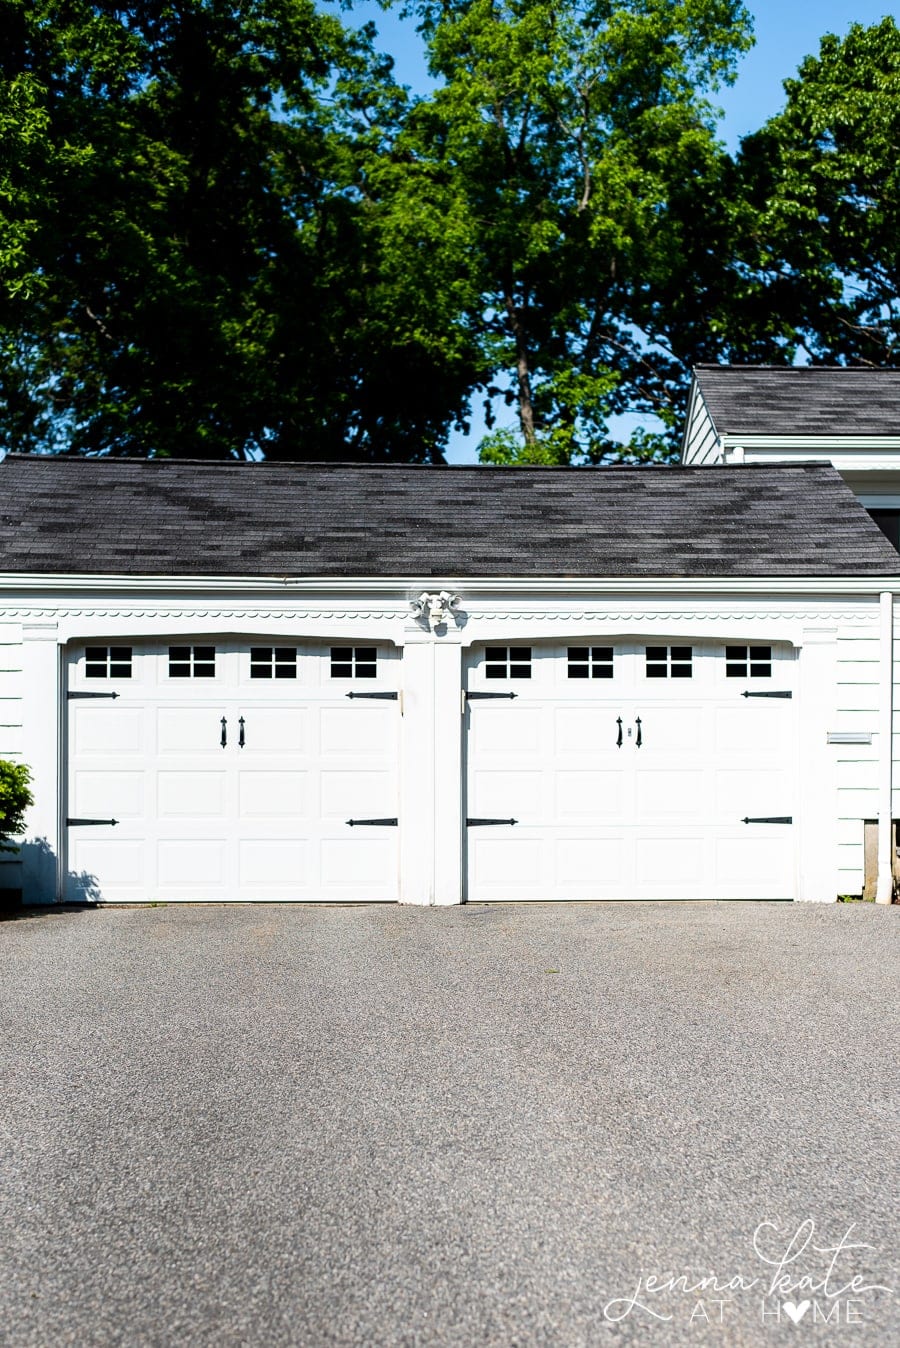 Dual garage doors, side by side, white with DIY window cutouts and other embellishments